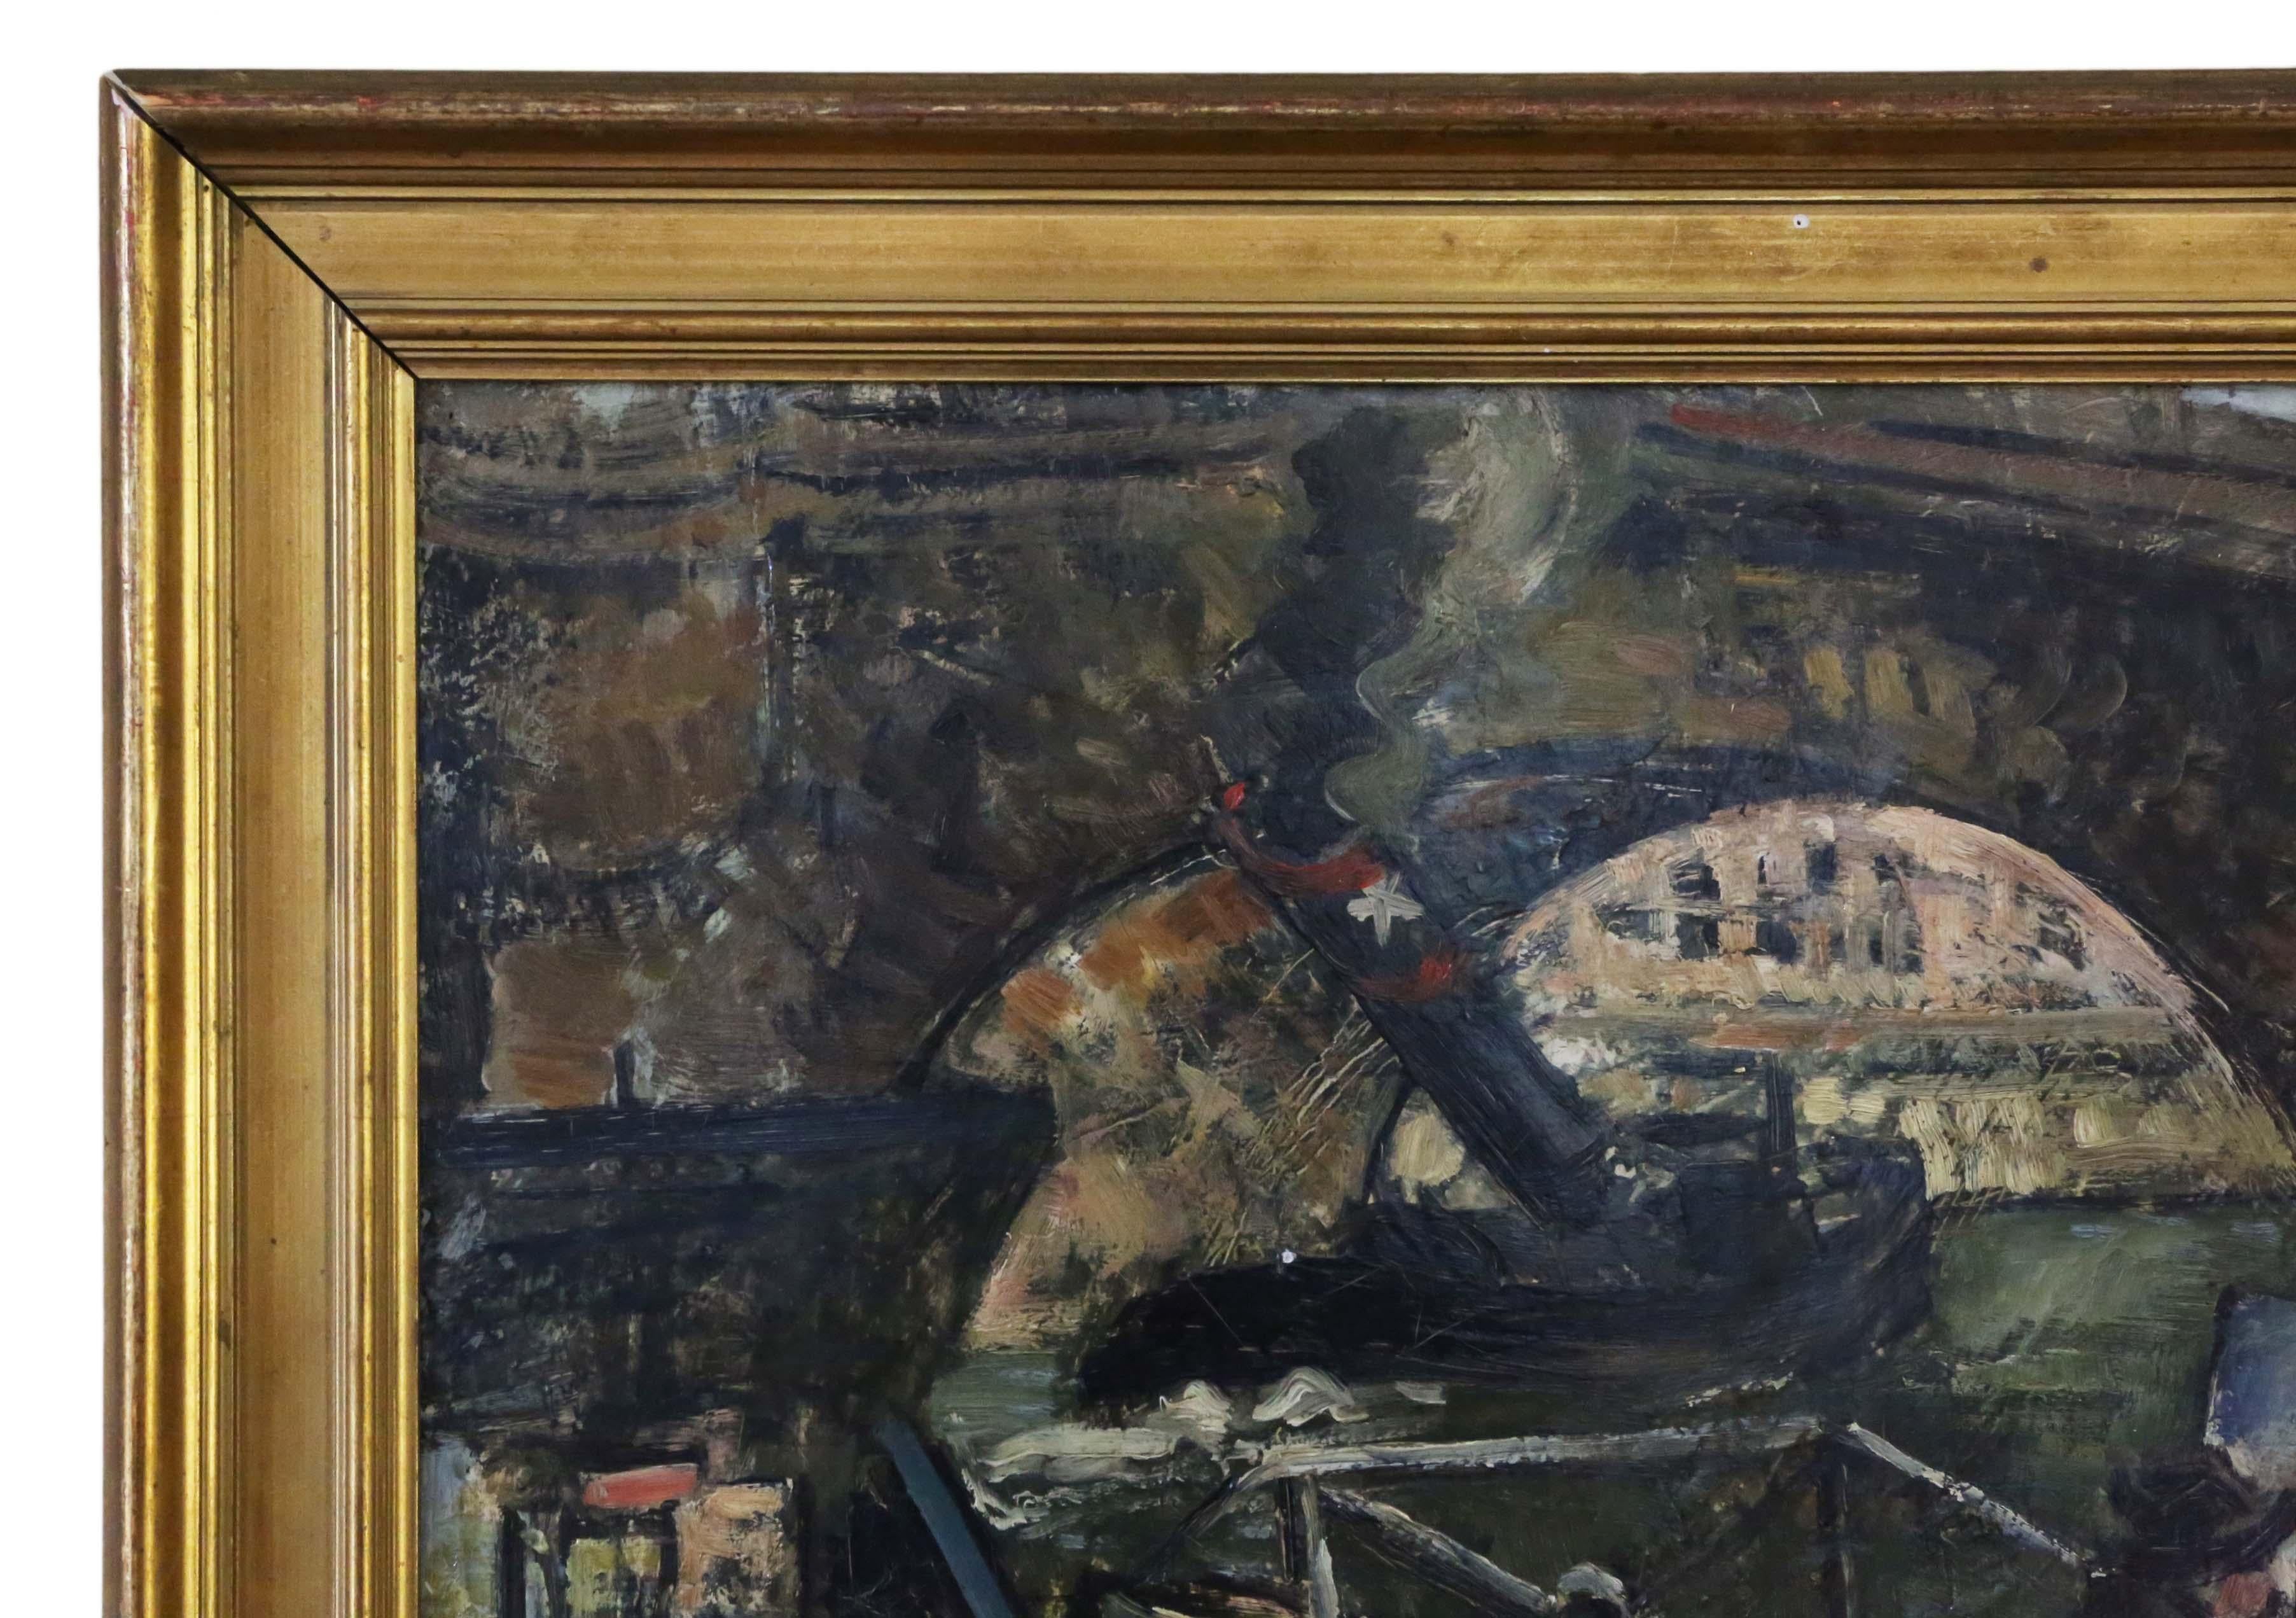 A fine quality large oil on canvas painting artwork by Pierre Peltier 1927, a vintage antique cityscape. The painting depicts a tugboat in trouble on the Seine at Pont Neuf. Titled 'La Seine au Pont Neuf'. This bears many similarities to the